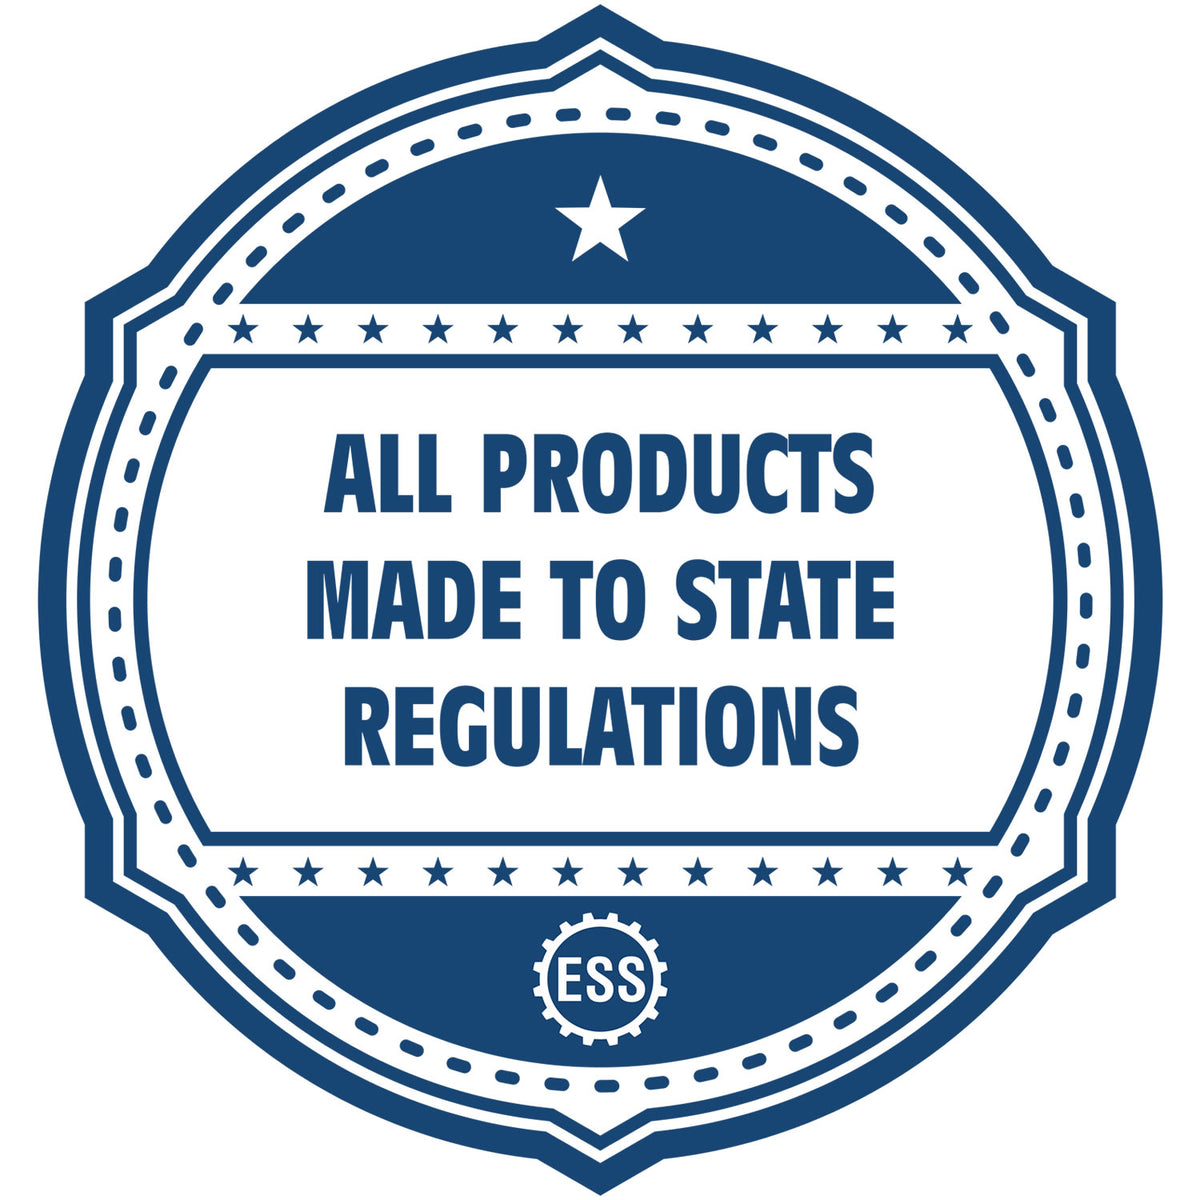 A blue icon or badge for the Hybrid Illinois Engineer Seal showing that this product is made in compliance with state regulations.